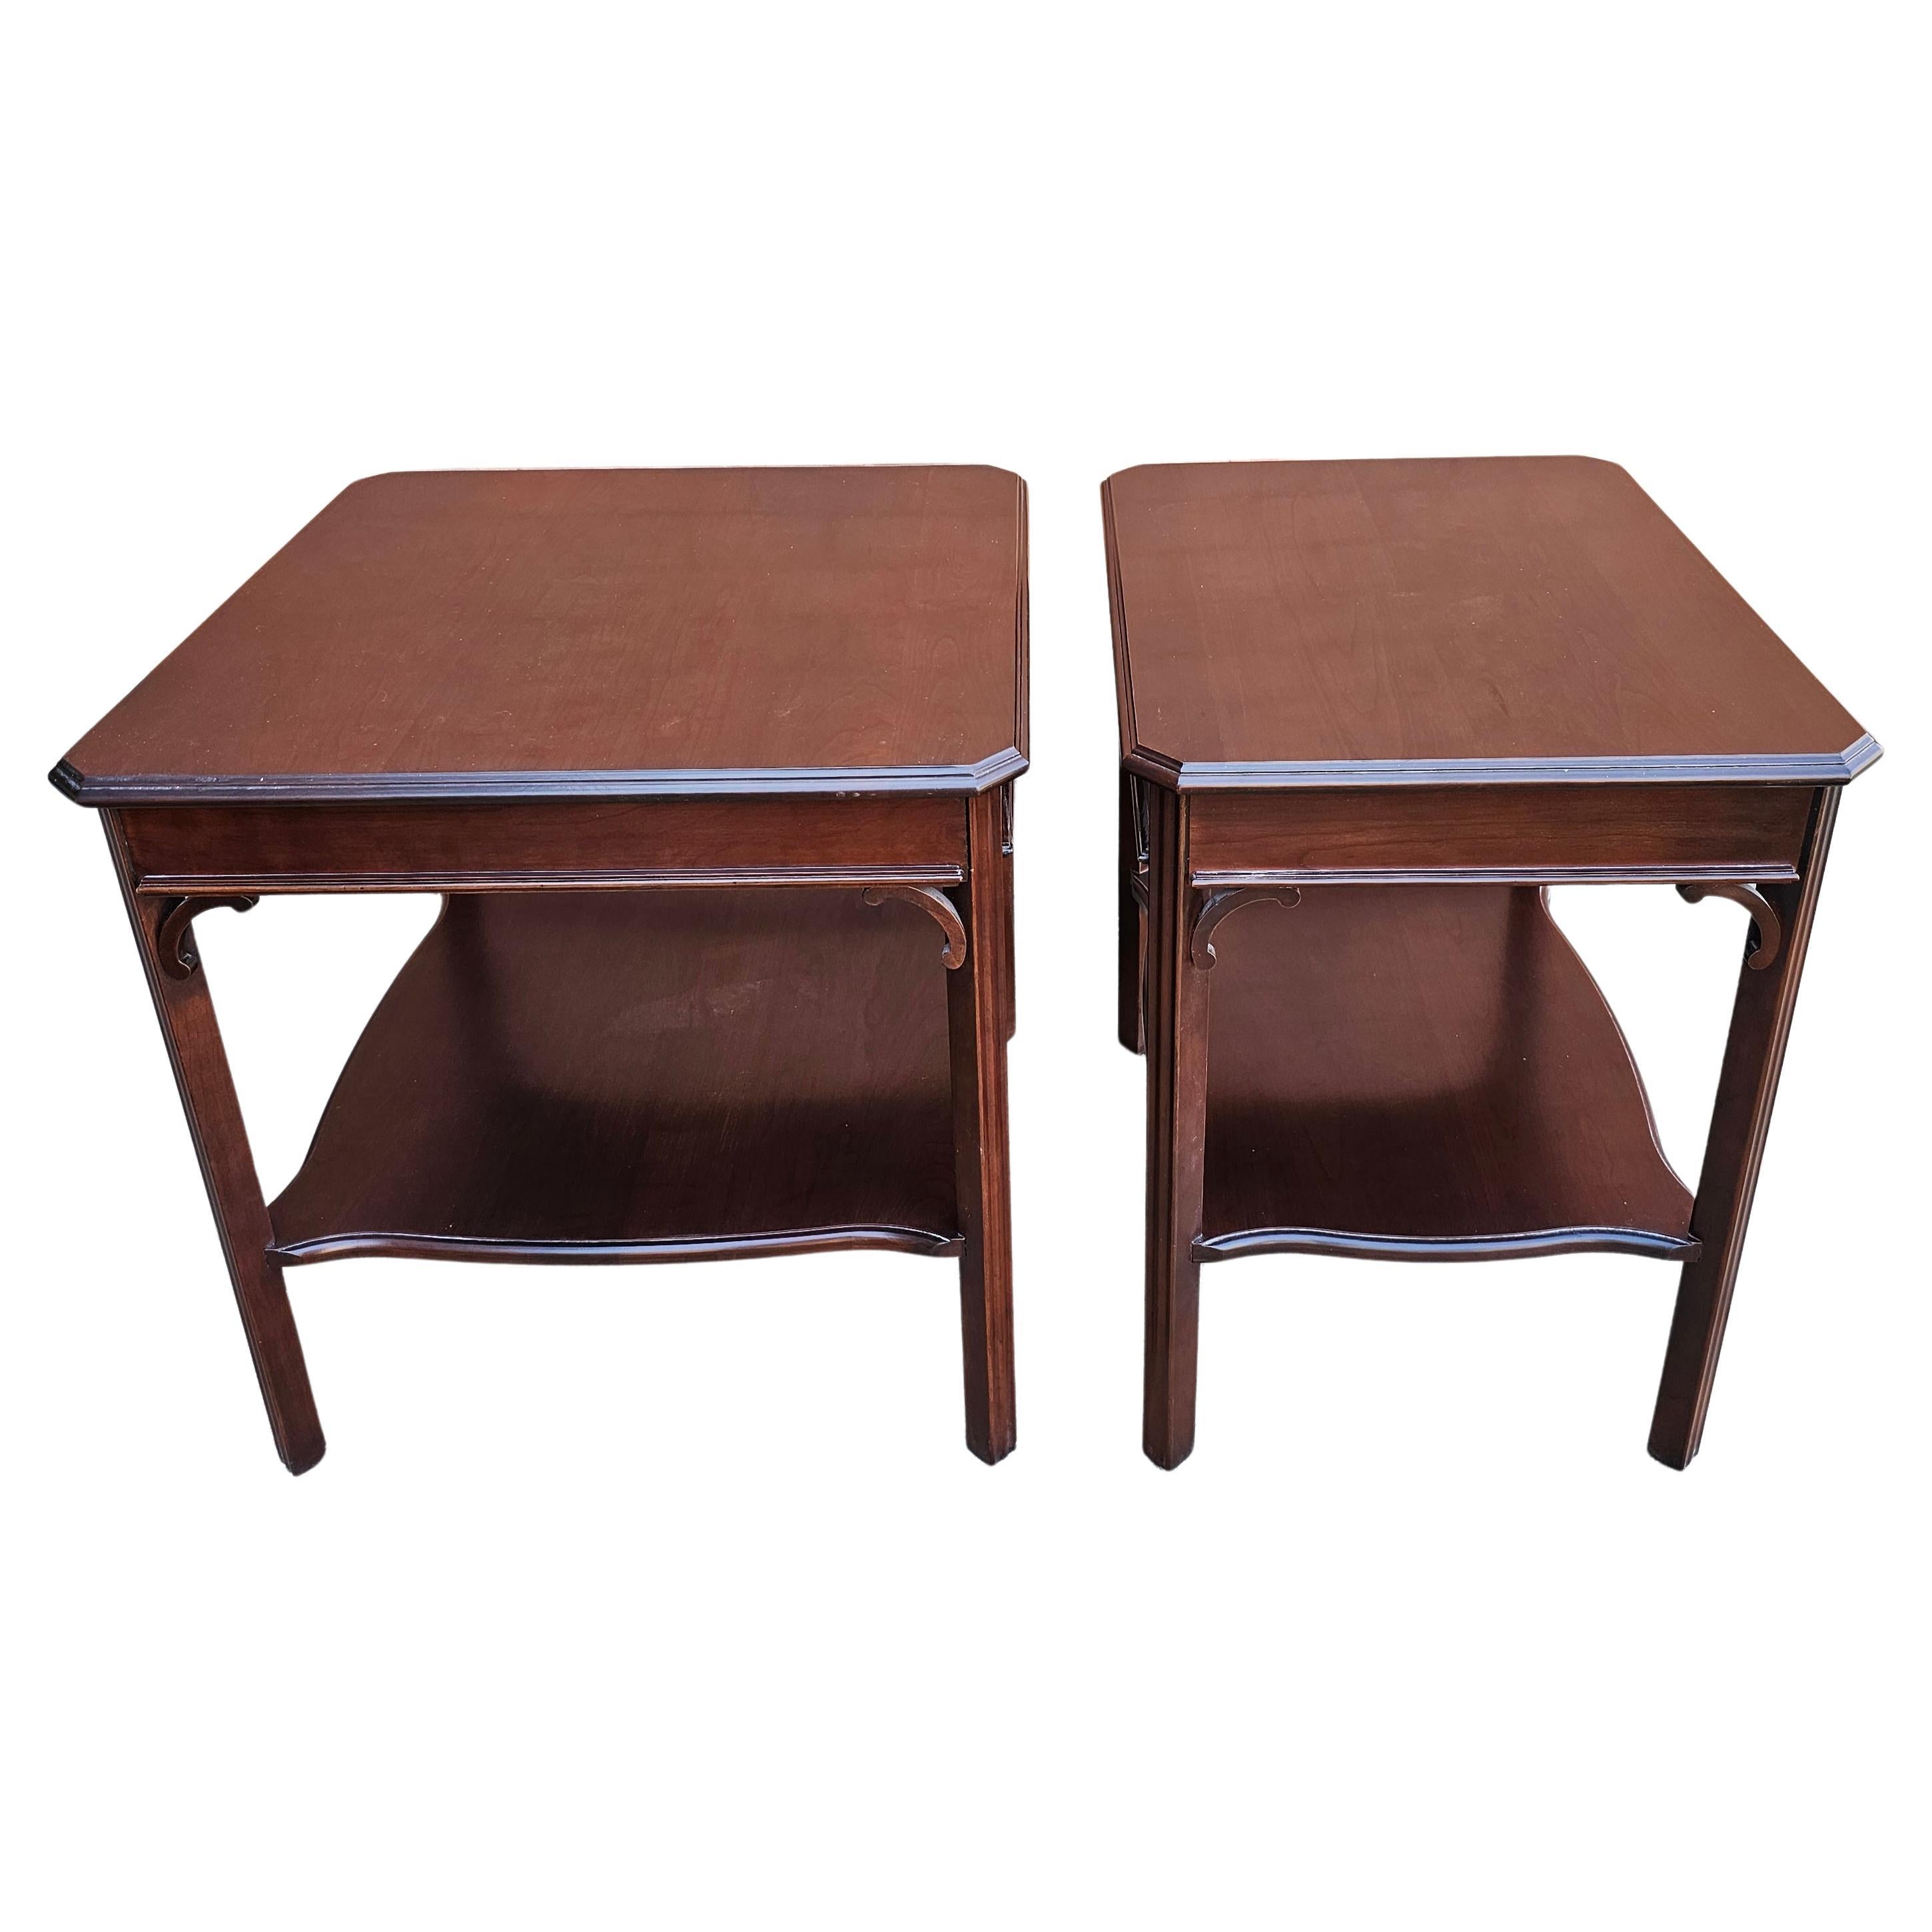 Harden Furniture Chippendale Solid Cherry Side Tables with Protective Glass Top